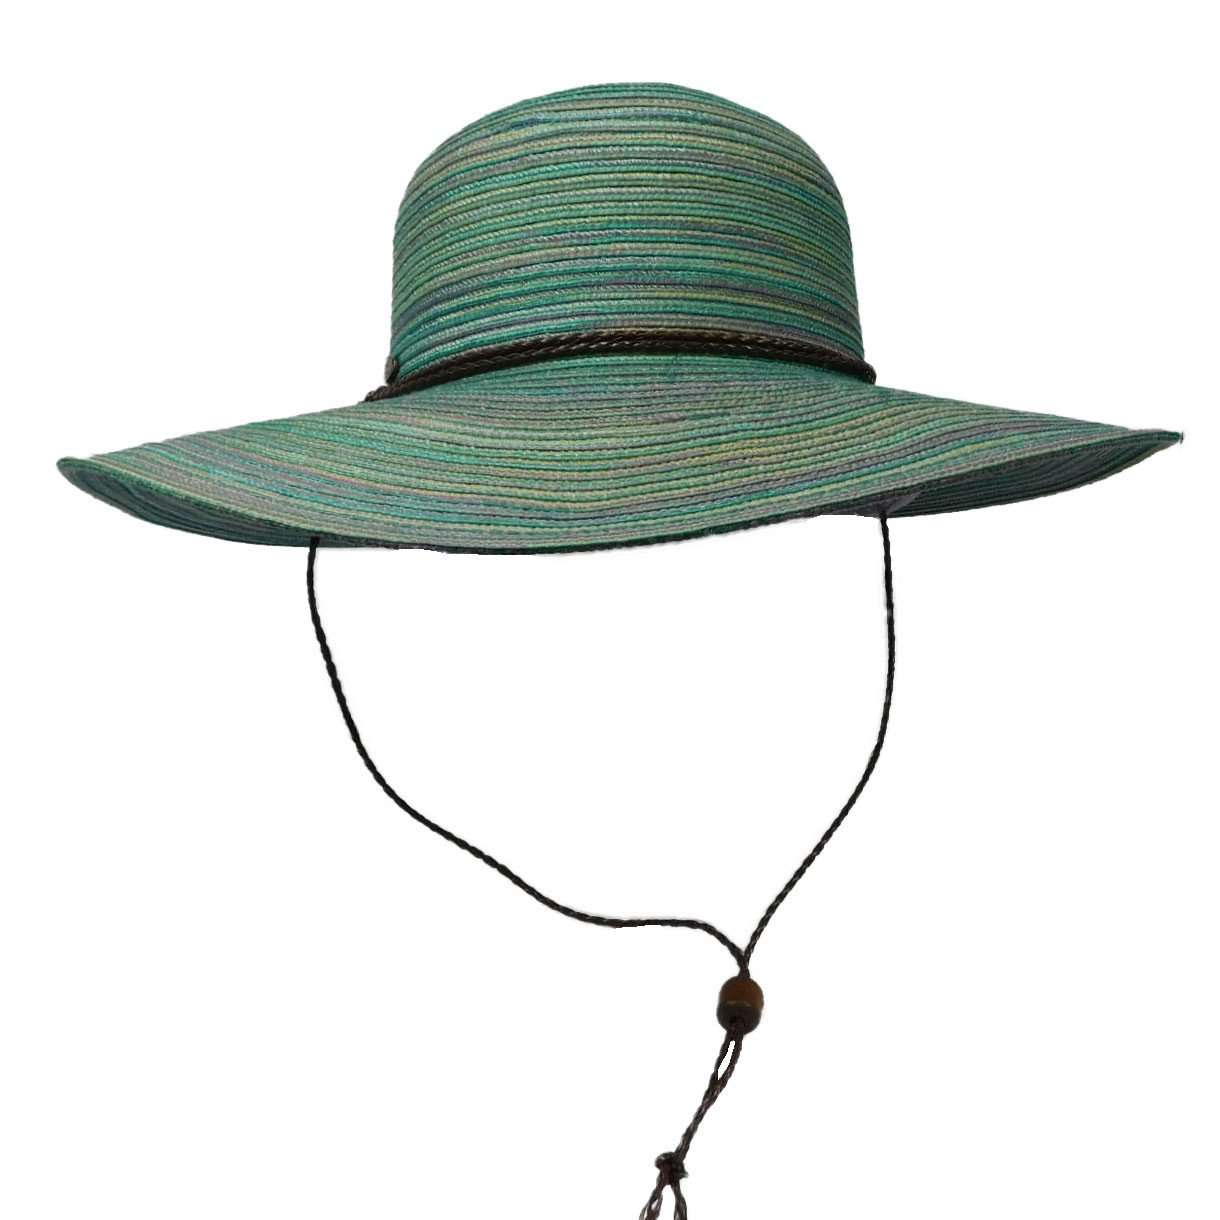 Floppy Hat with Chin Cord by Cappelli Floppy Hat Cappelli Straworld csw202TL Teal Medium (57 cm) 